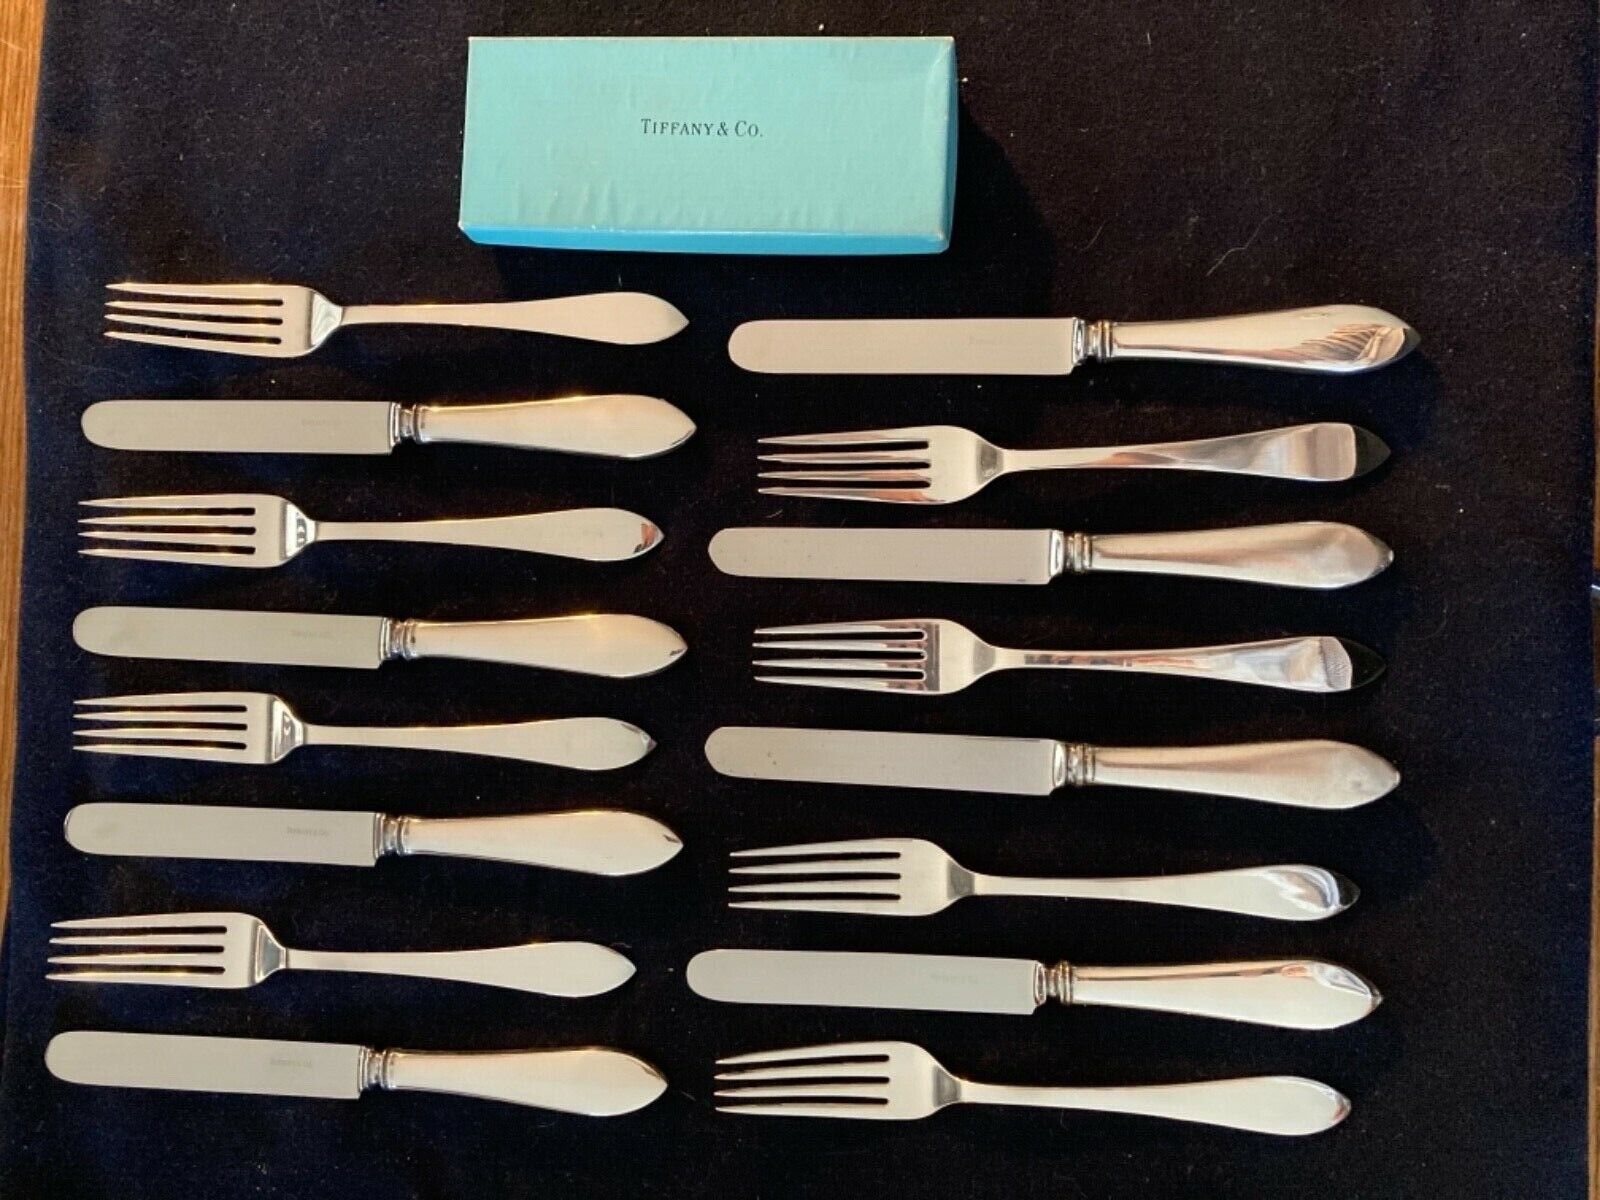 Tiffany & Company FANEUIL Sterling Silver BREAKFAST SET 8 FORKS & 8 KNIFES 